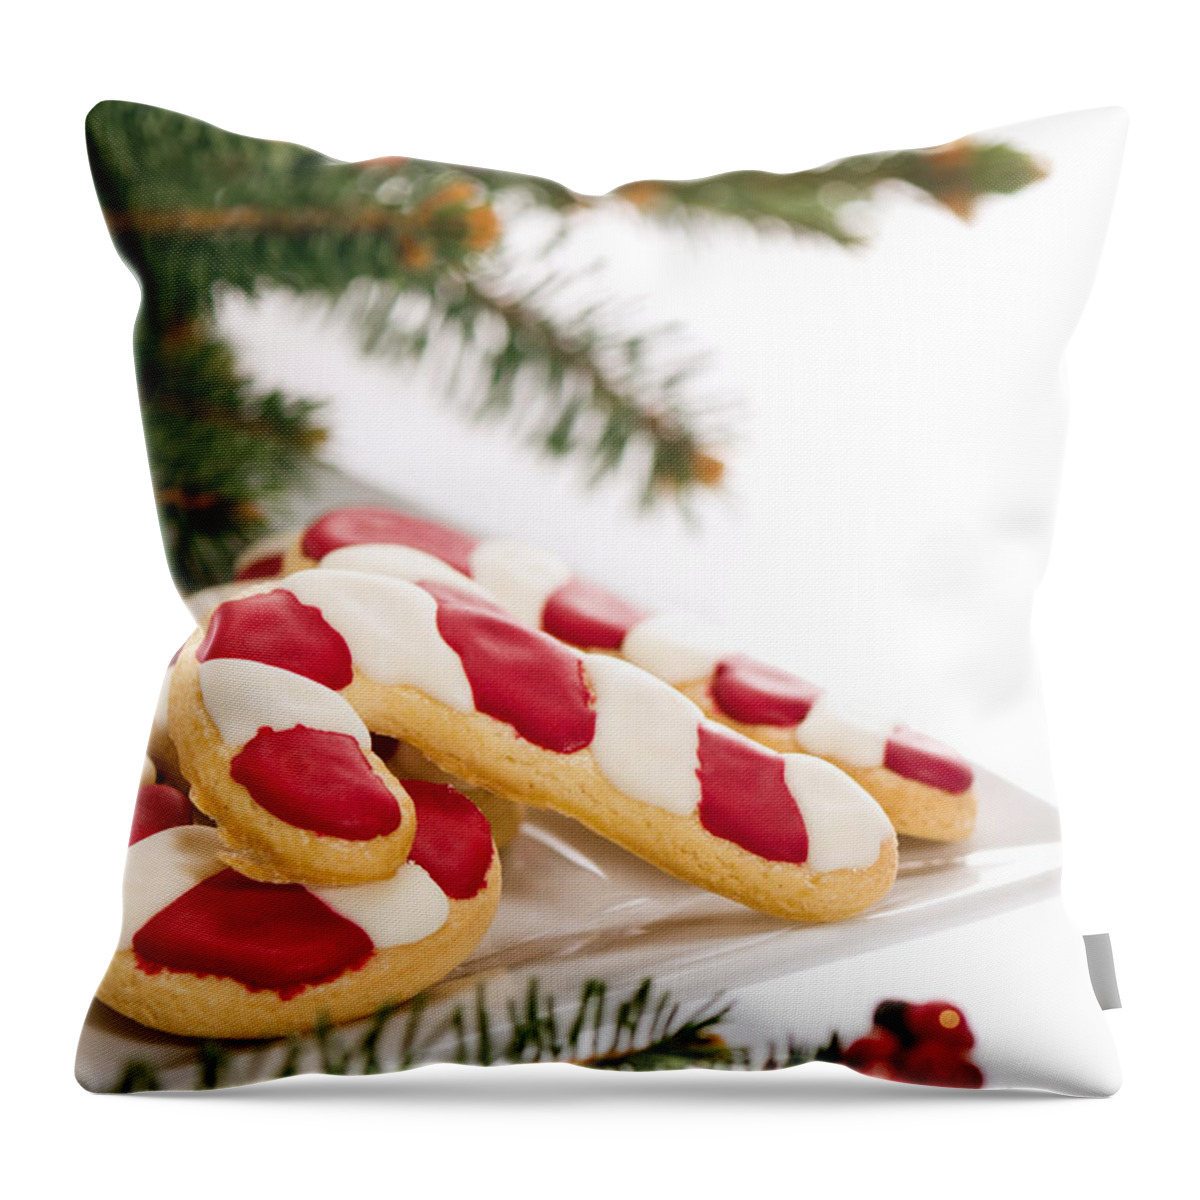 Icing Sugar Throw Pillow featuring the photograph Christmas Cookies Decorated With Real Tree Branches by U Schade